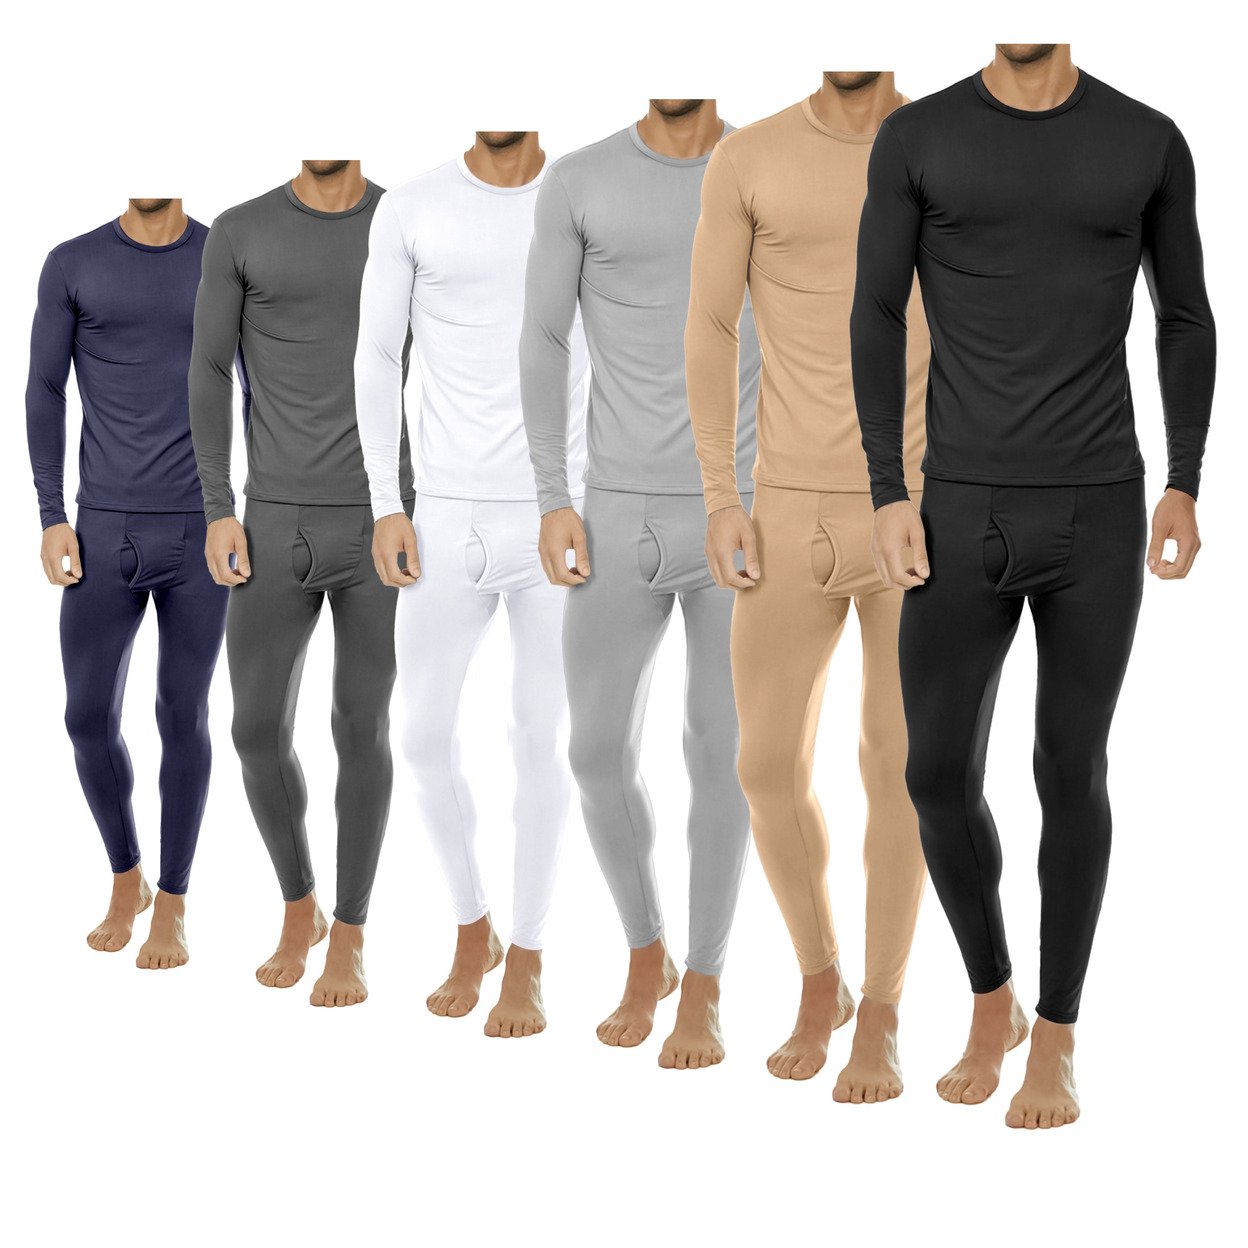 2-Sets: Men's Winter Warm Fleece Lined Thermal Underwear Set For Cold Weather - Grey&navy, Small